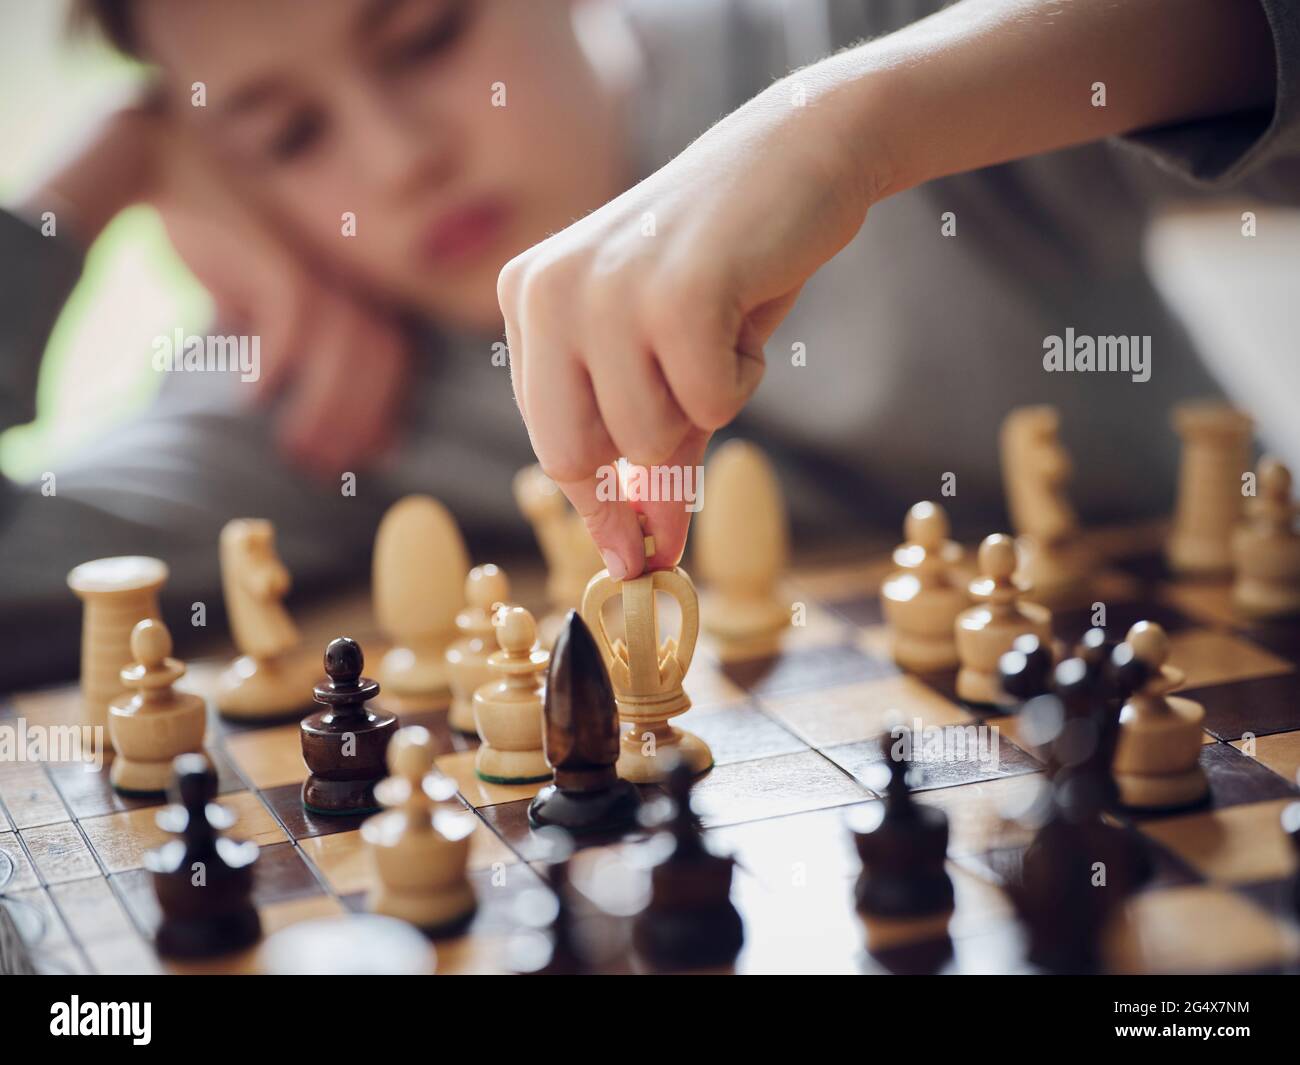 Boy holding chess piece while playing at home Stock Photo